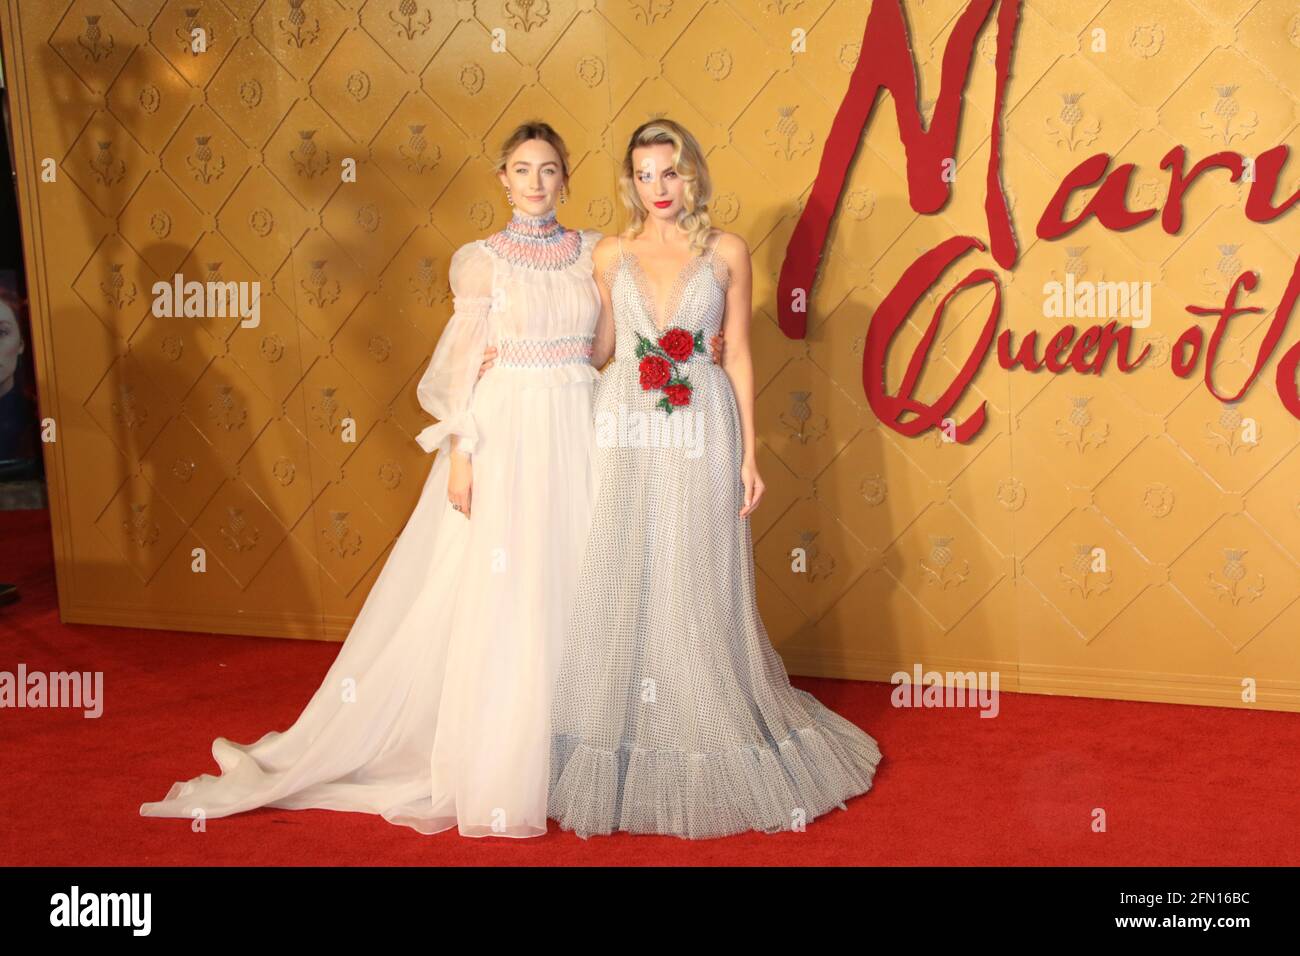 Dec 10, 2018 - London, England, UK - Mary Queen of Scots European Premiere     Photo Shows: Margot Robbie and Saoirse Ronan Stock Photo